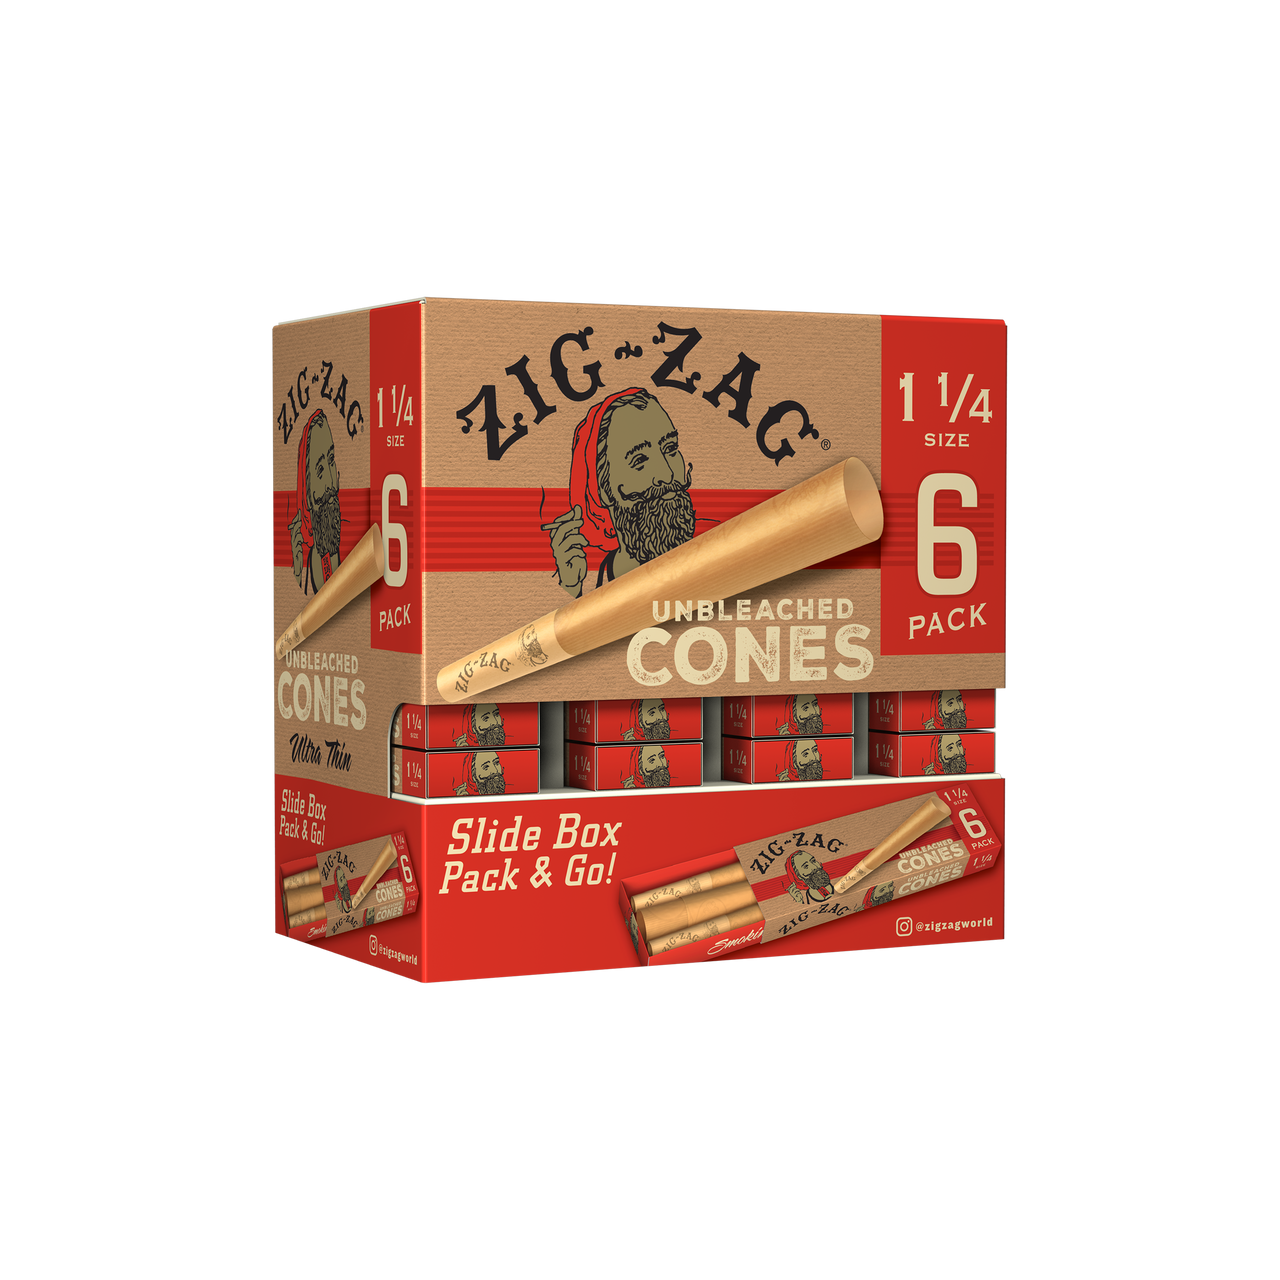 Zig Zag Unbleached Pre Rolled Cones 1 1/4 inch 36 pack of 6 Cones